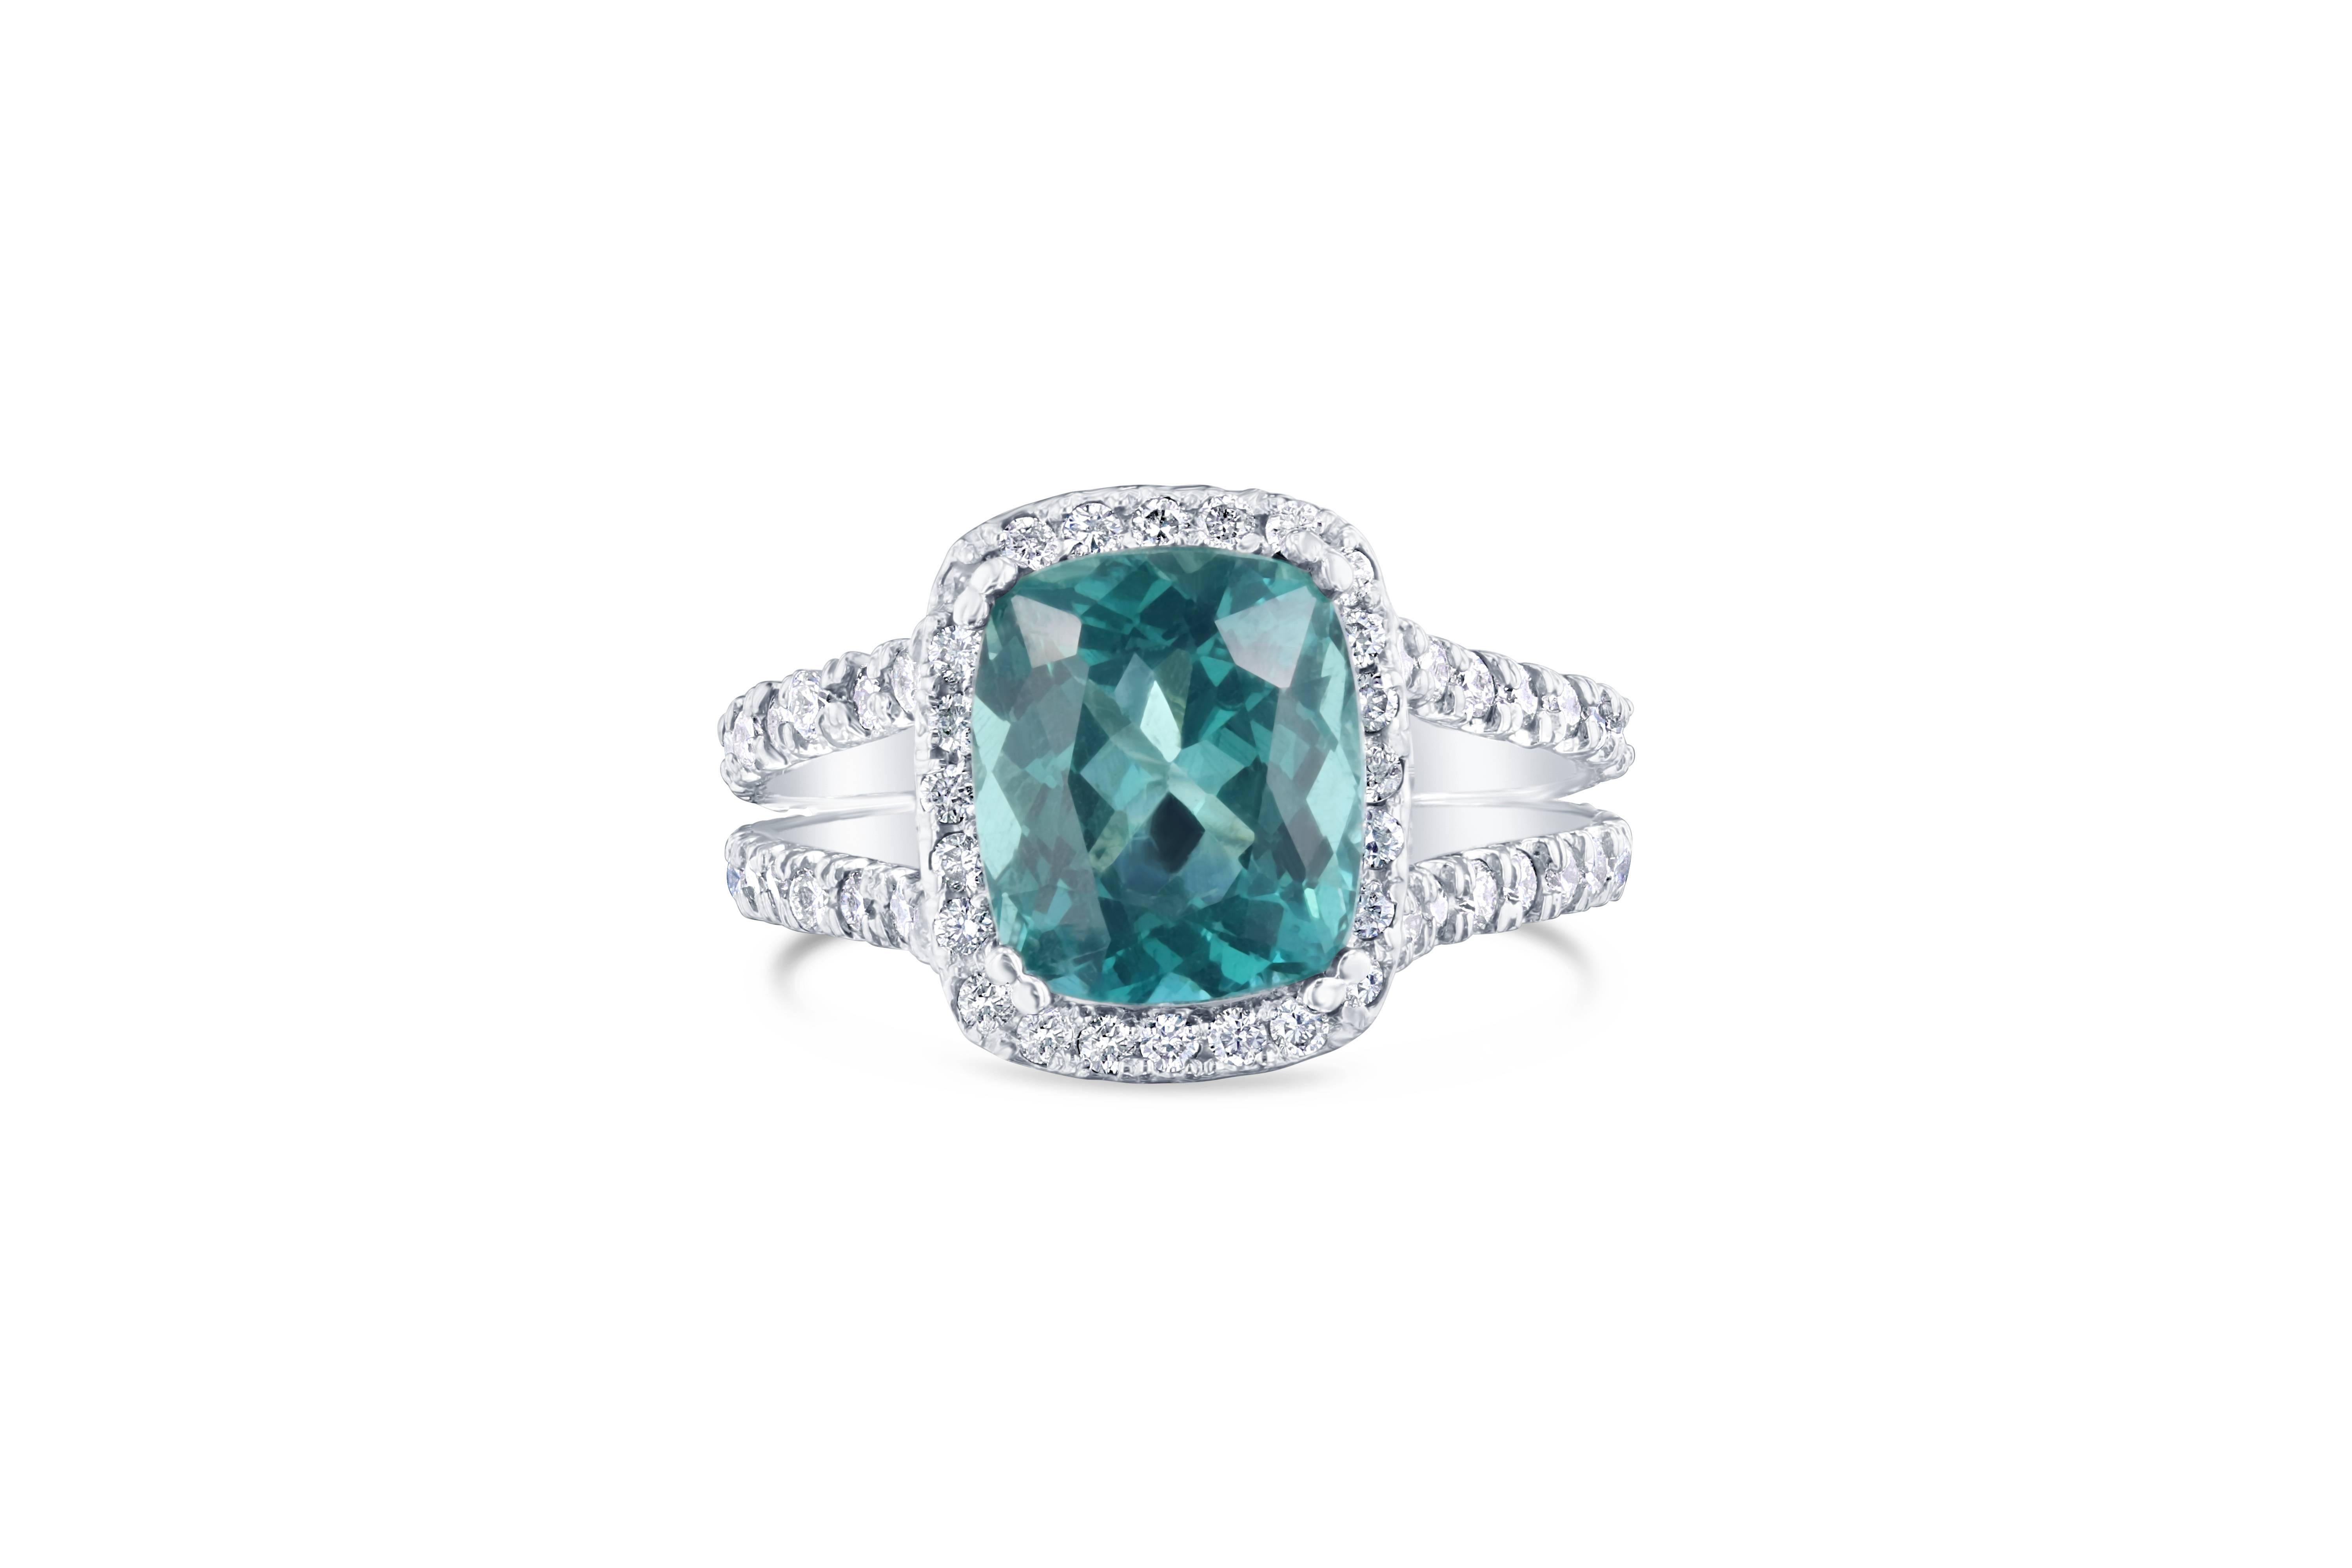 Gorgeous Blue-Green Apatite and Diamond Ring.   The stone Apatite is a natural gemstone.  This ring has a 3.65 carat rectangular cut Apatite which is surrounded by a Halo of 93 Round Cut Diamonds that weigh 1.02 carat.  The clarity and color of the